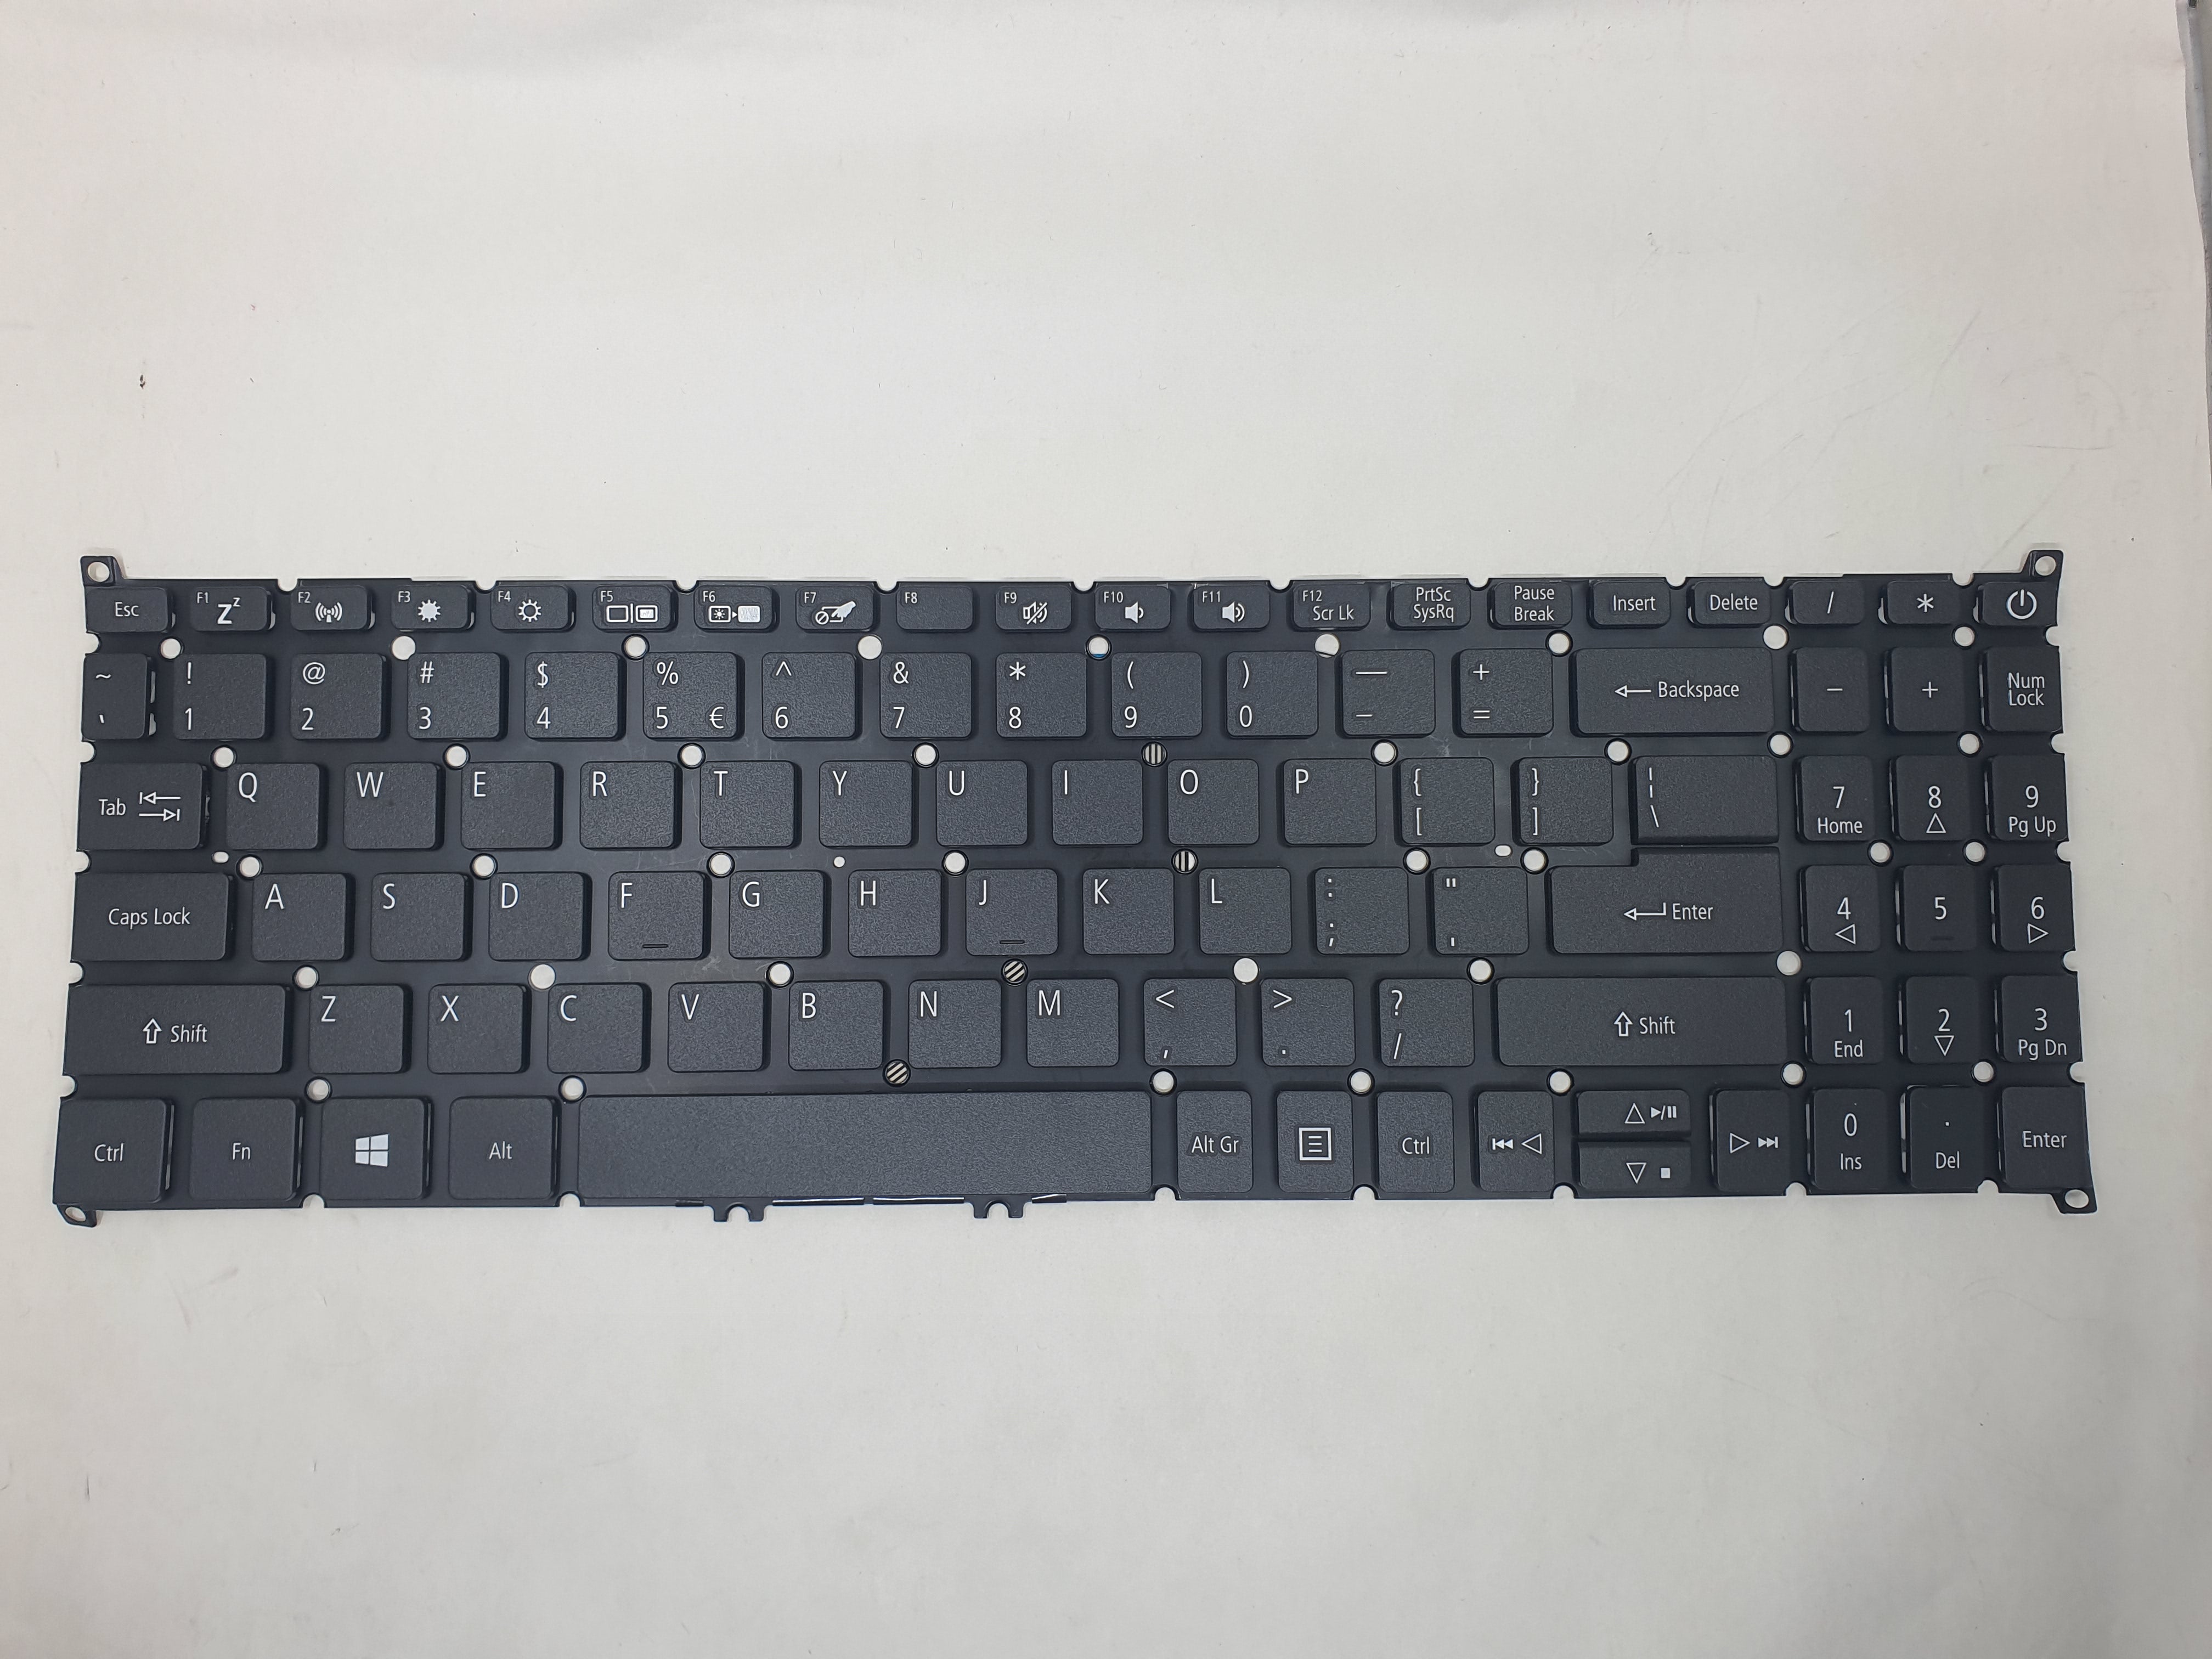 Acer Keyboard A515-53G WL for Acer Aspire 5 A515-53G